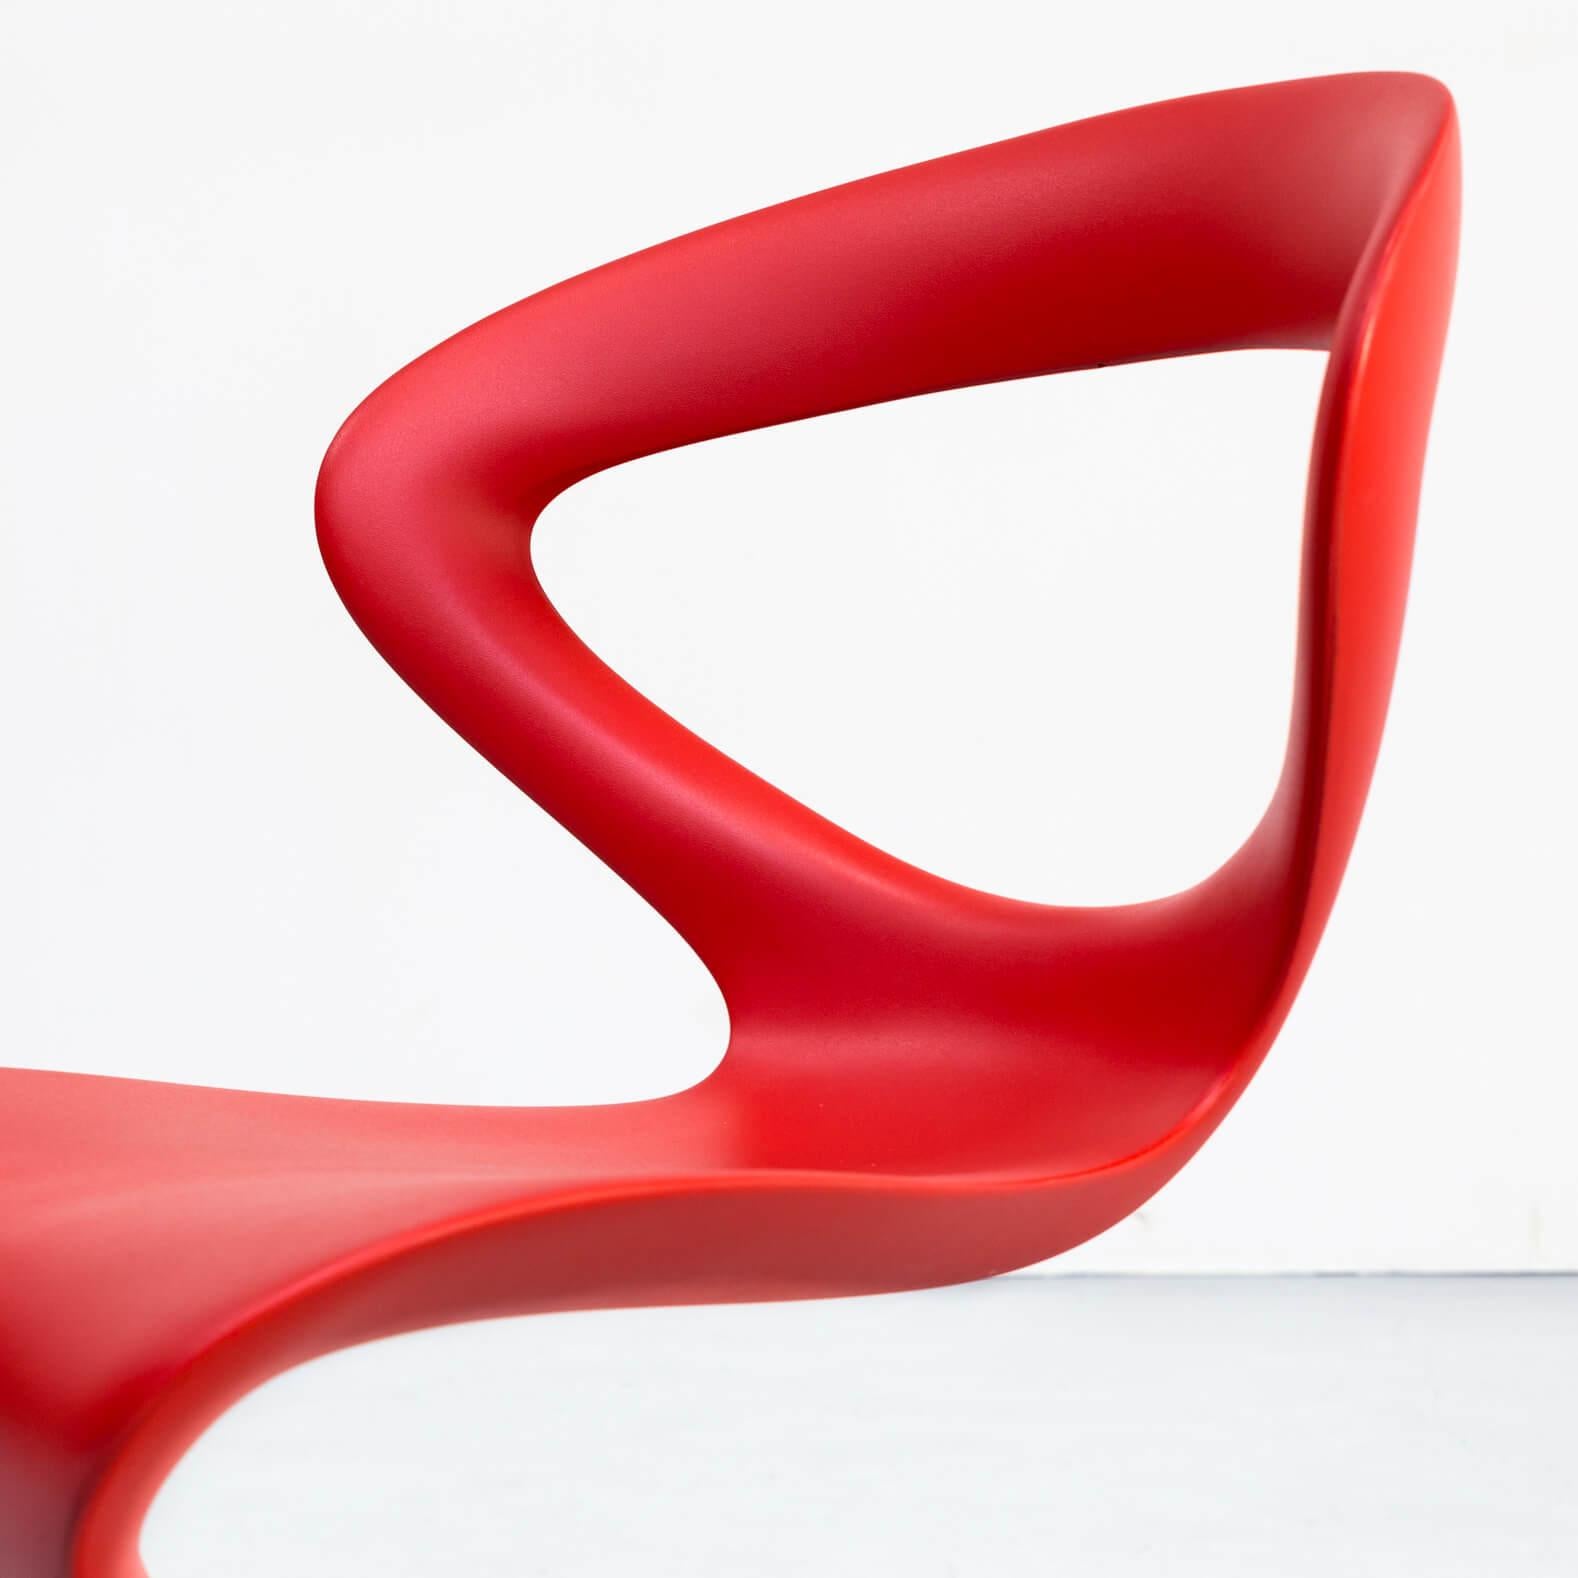 Acrylic Andreas Ostwold ‘Callita’ Chair for Infinity Designs For Sale